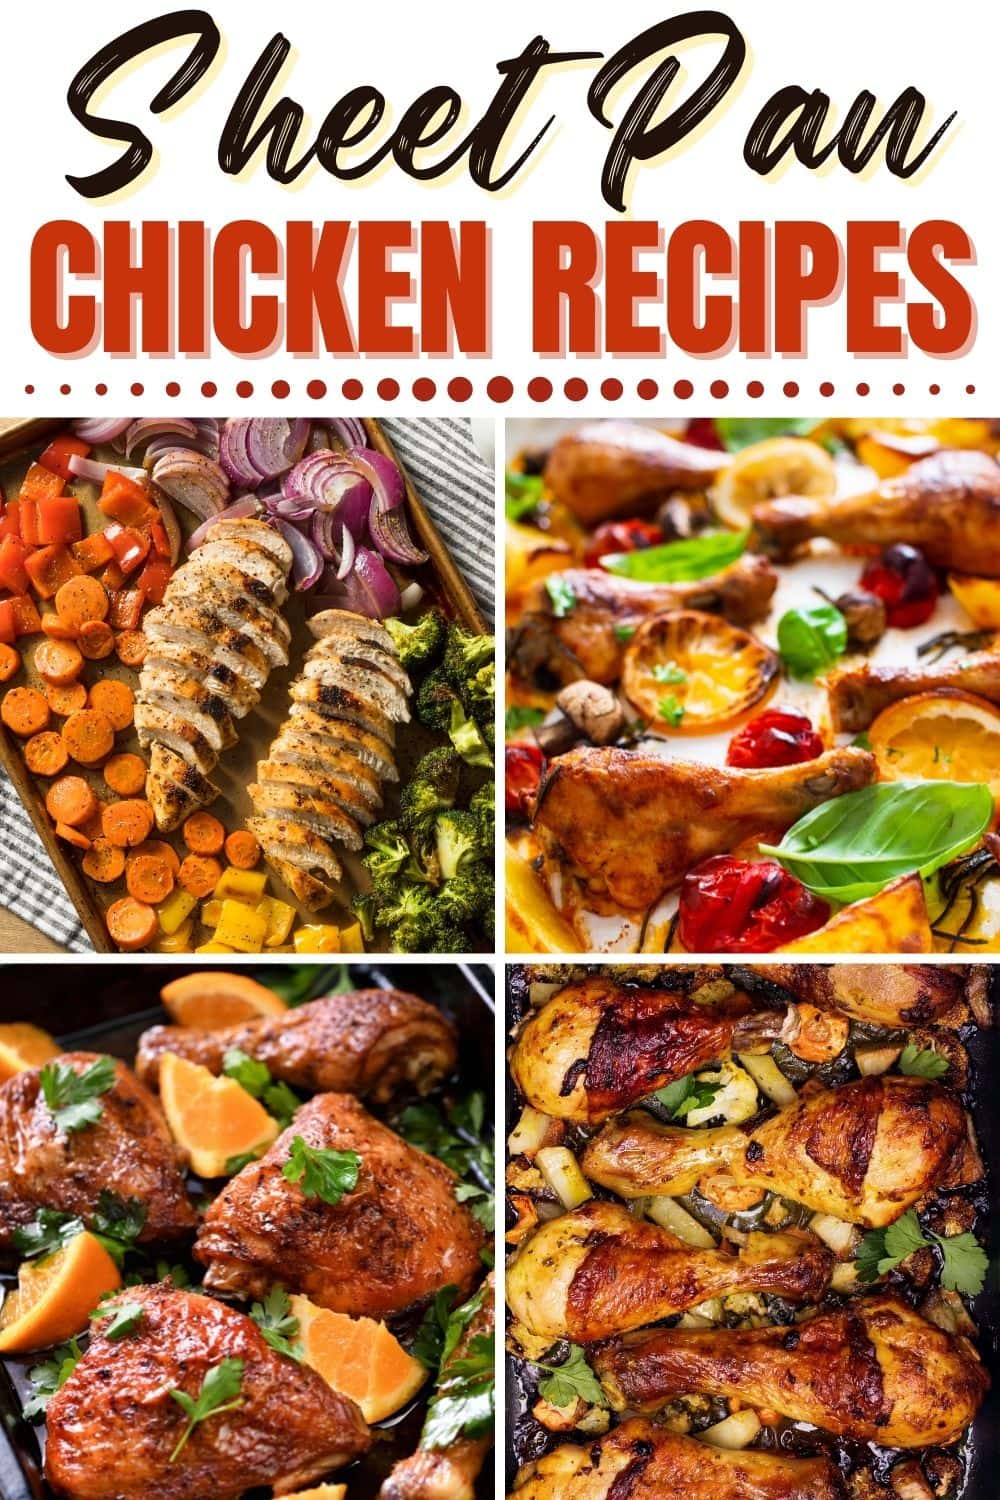 17 Best Sheet Pan Chicken Recipes for Dinner - Insanely Good